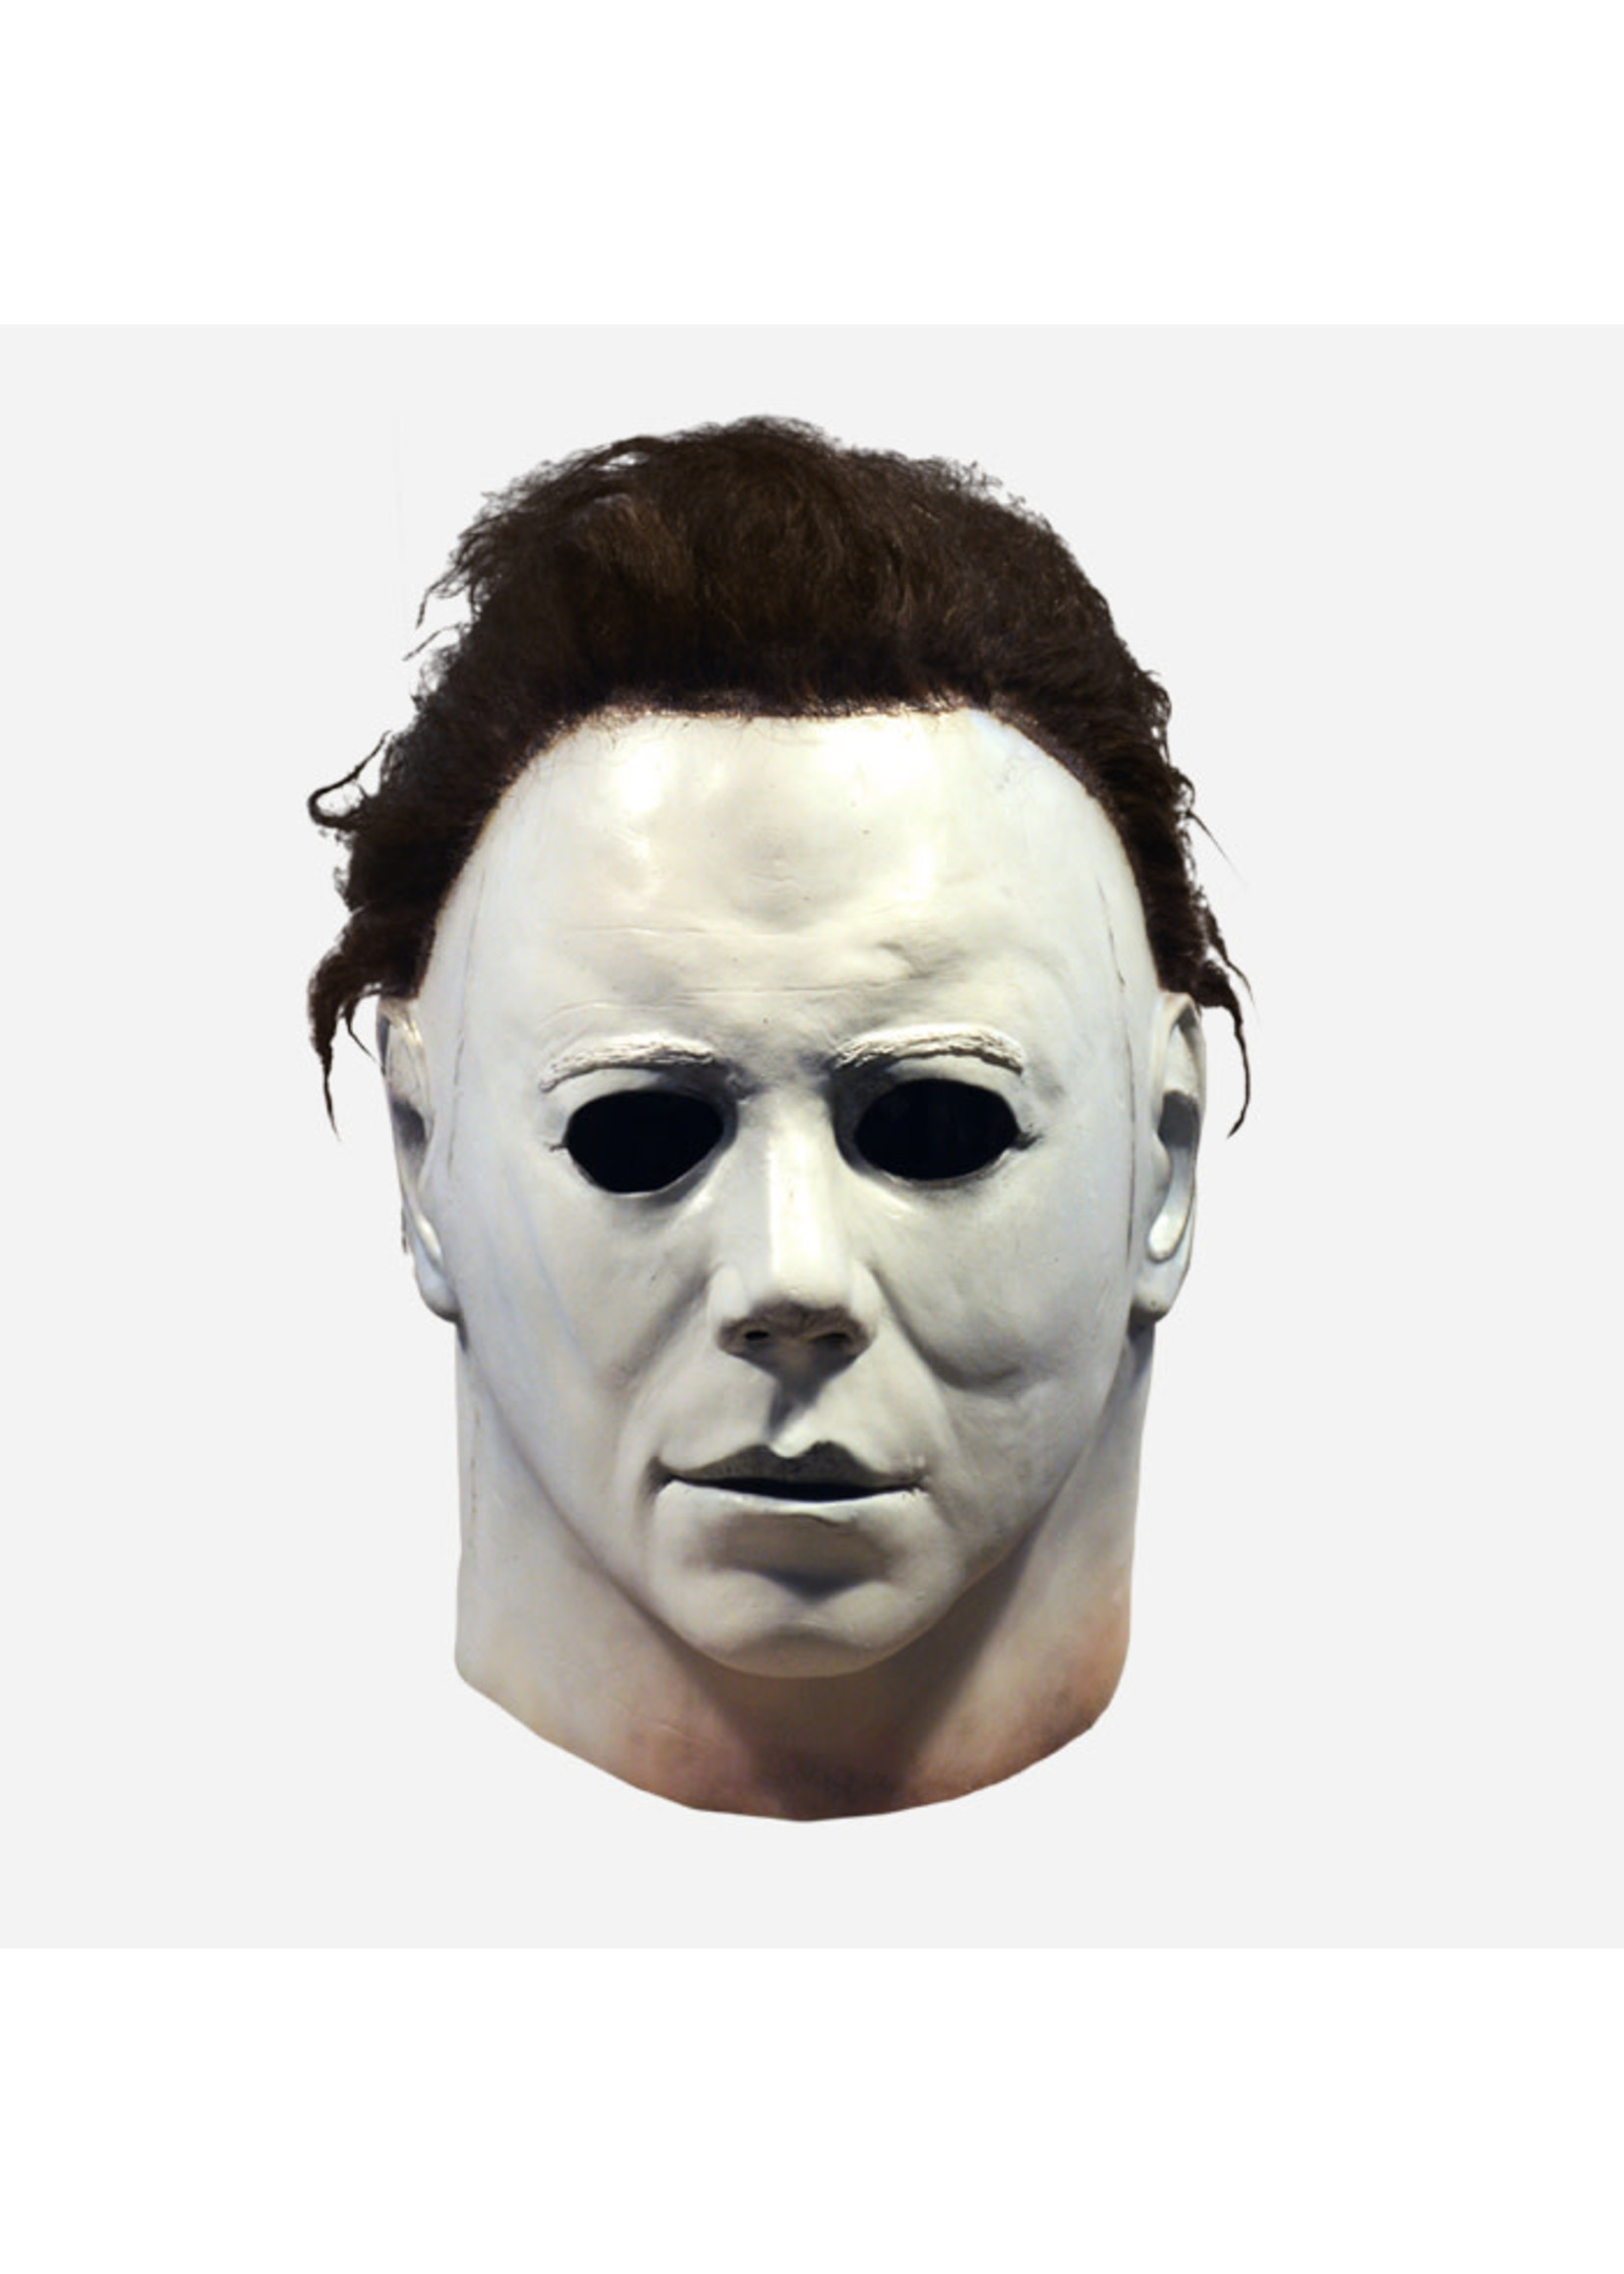 TRICK OR TREAT HALLOWEEN - MICHAEL MYERS MASK